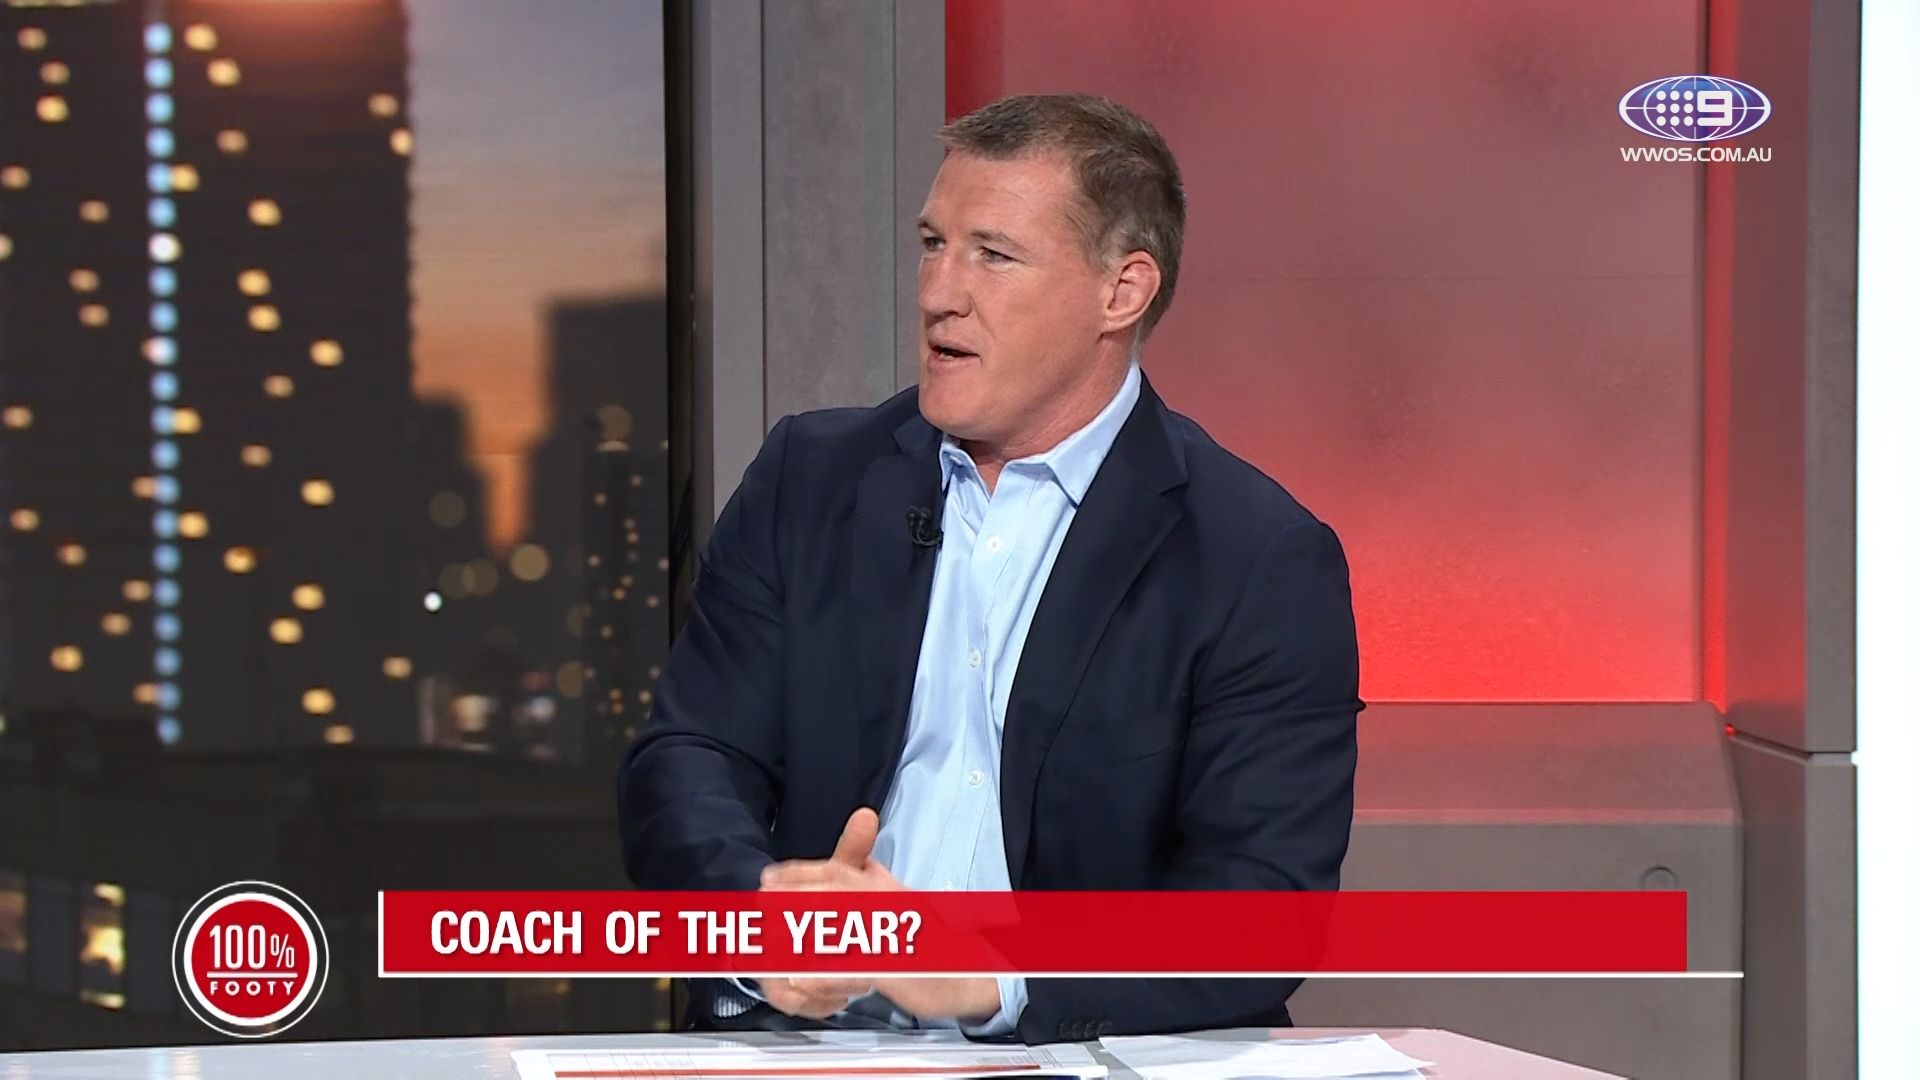 'It's not the improvement award': Paul Gallen rips apart leading contender's case for Dally M Coach of the Year